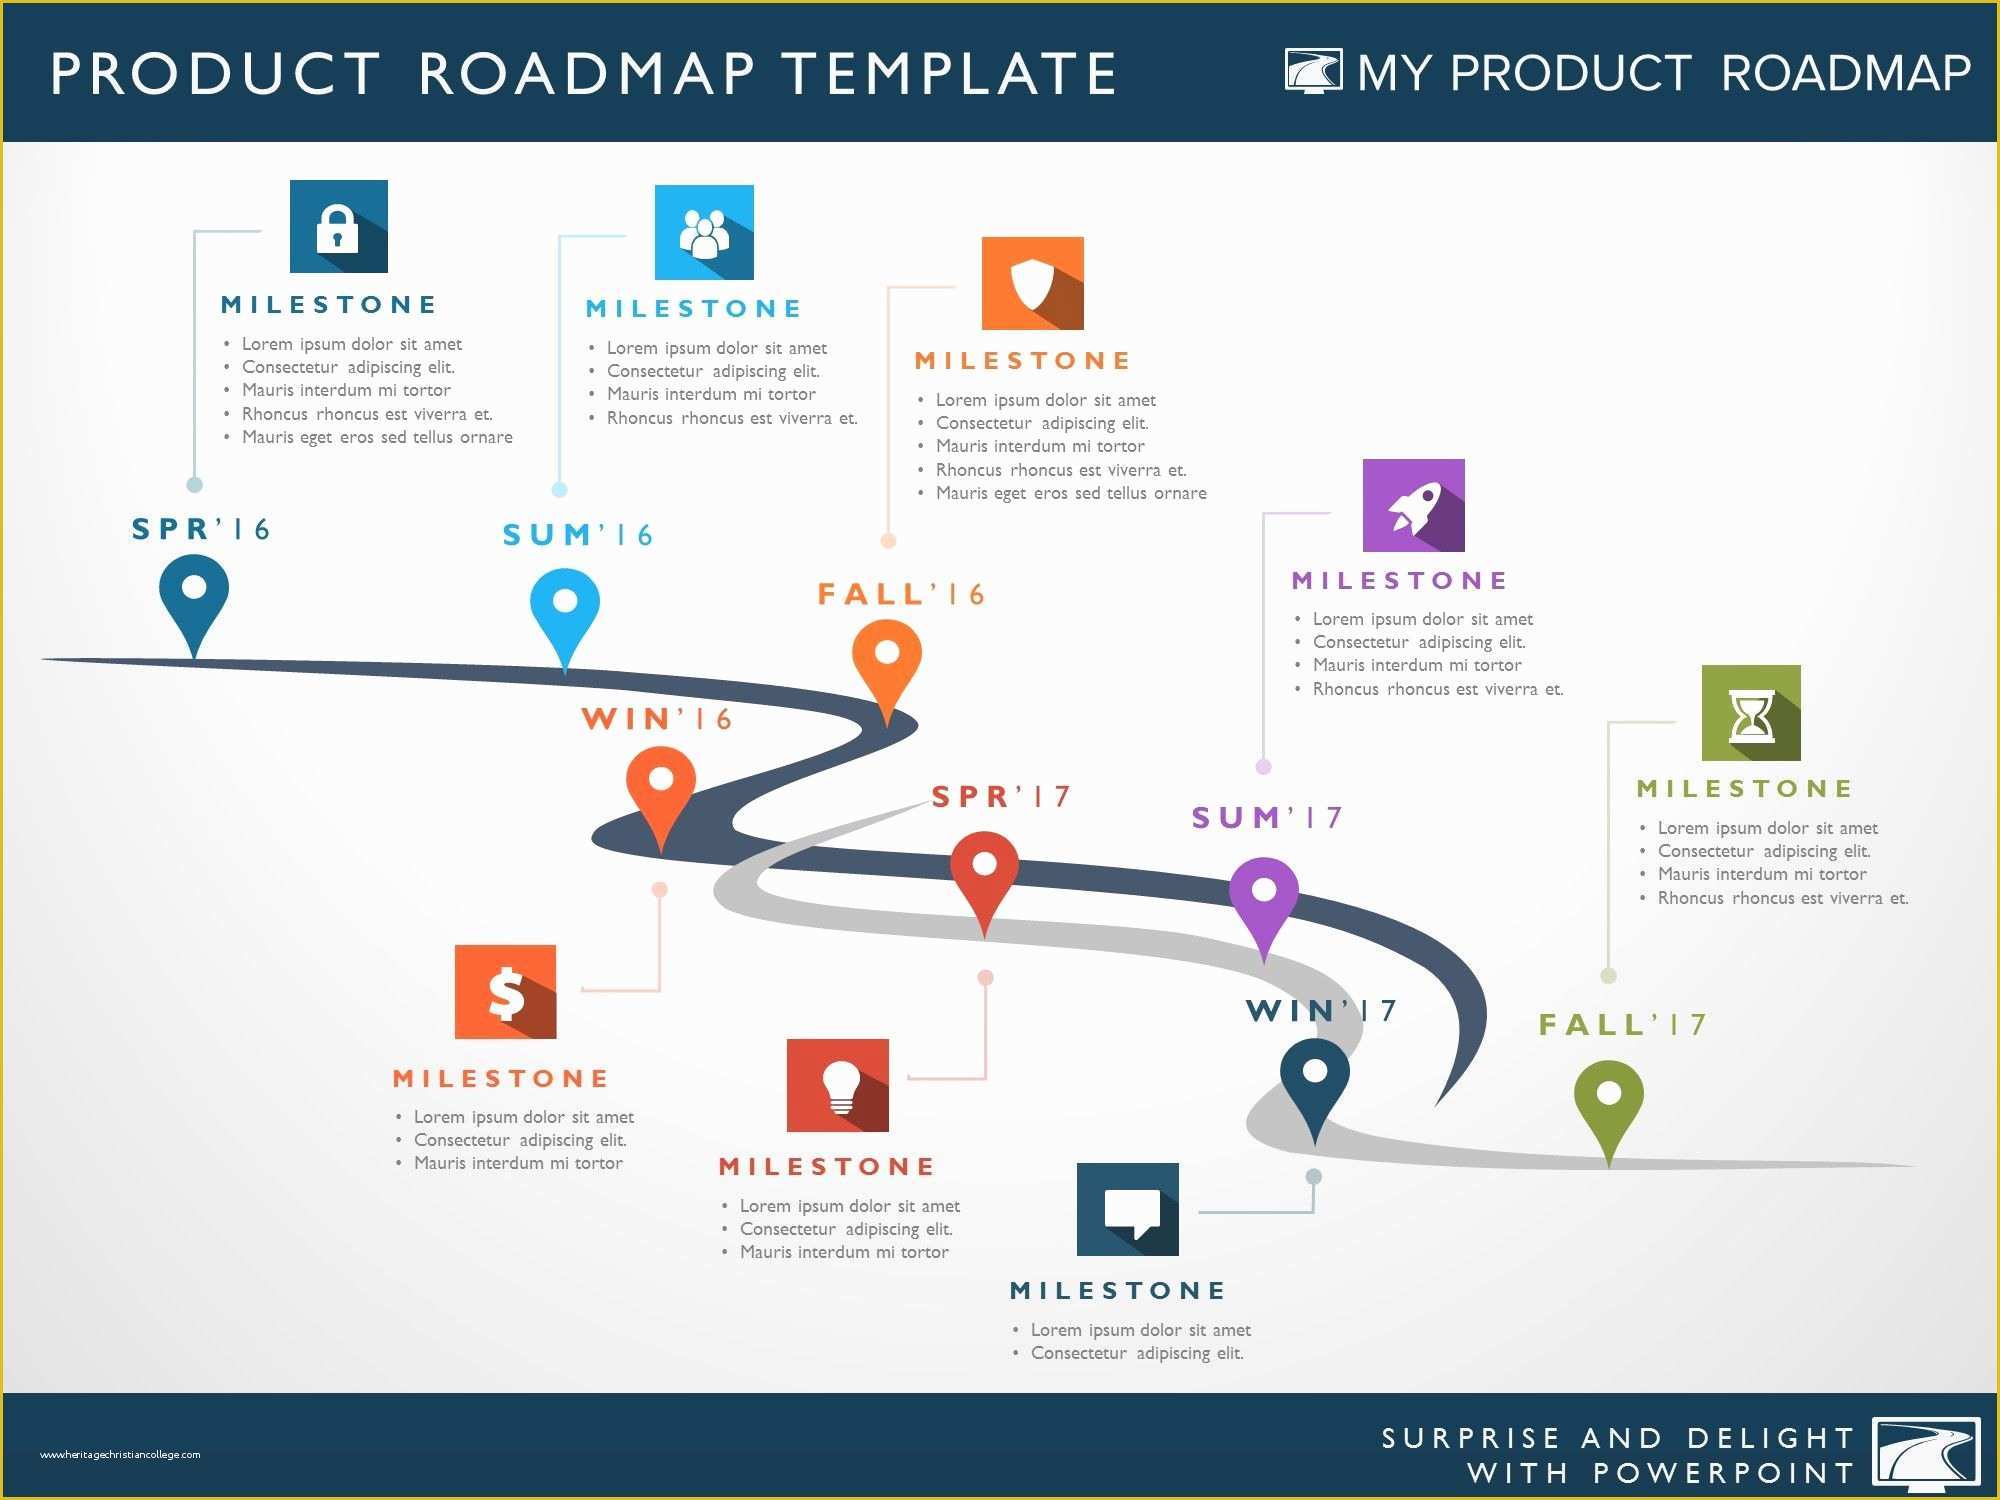 Product Roadmap Templates Powerpoint Download Free Of Product Strategy Portfolio Management Development Cycle